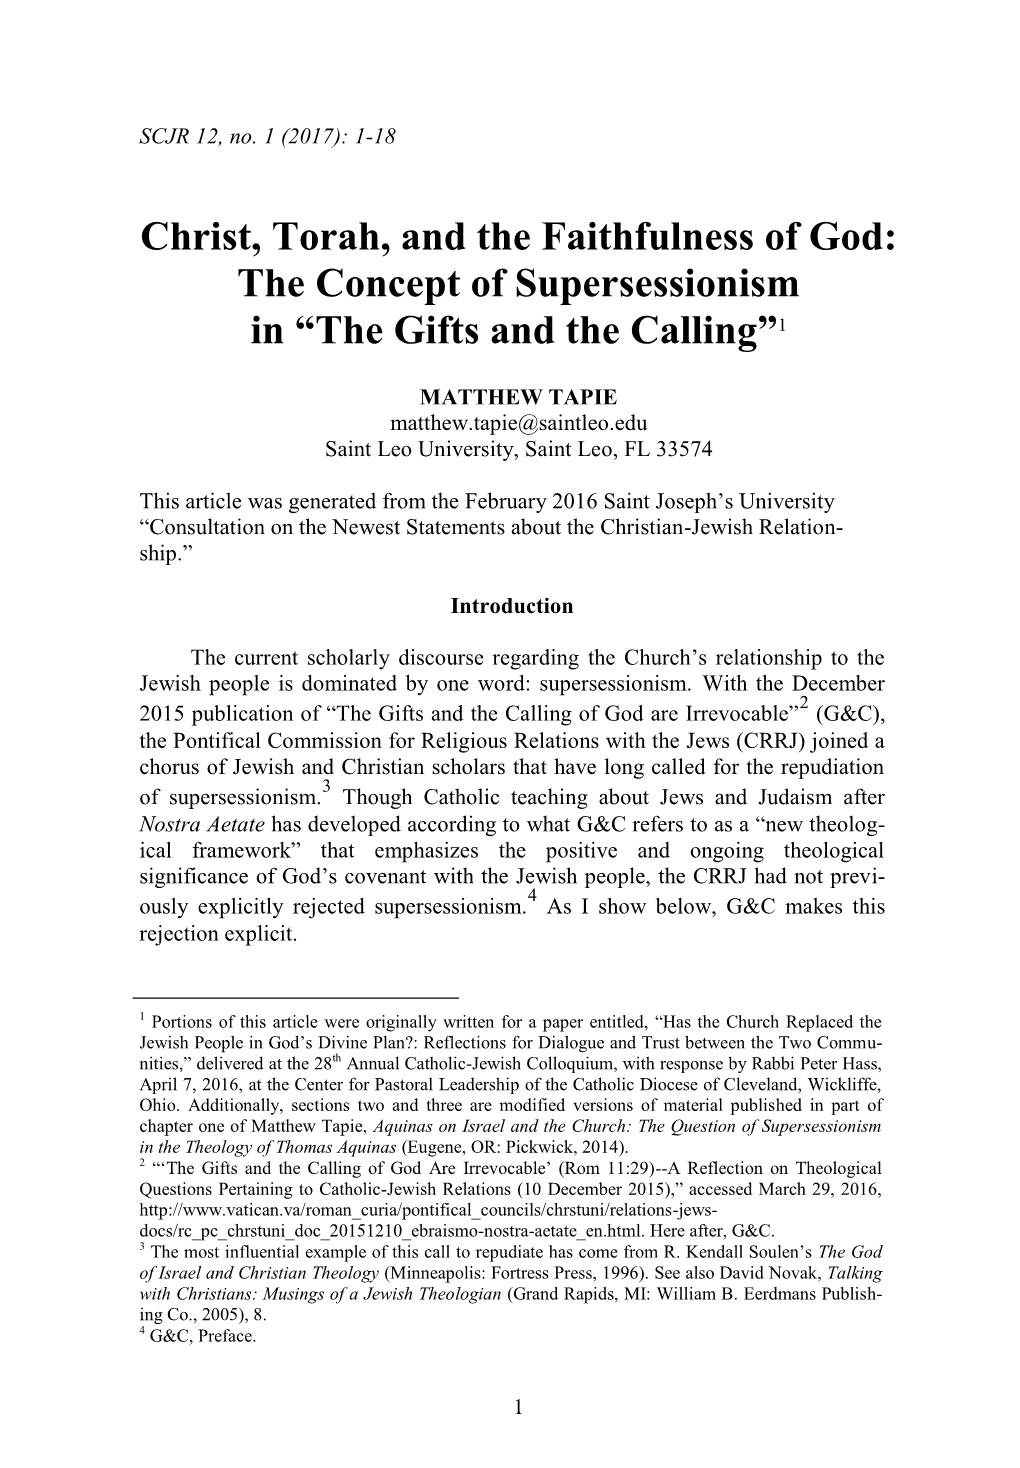 Christ, Torah, and the Faithfulness of God: the Concept of Supersessionism in “The Gifts and the Calling”1